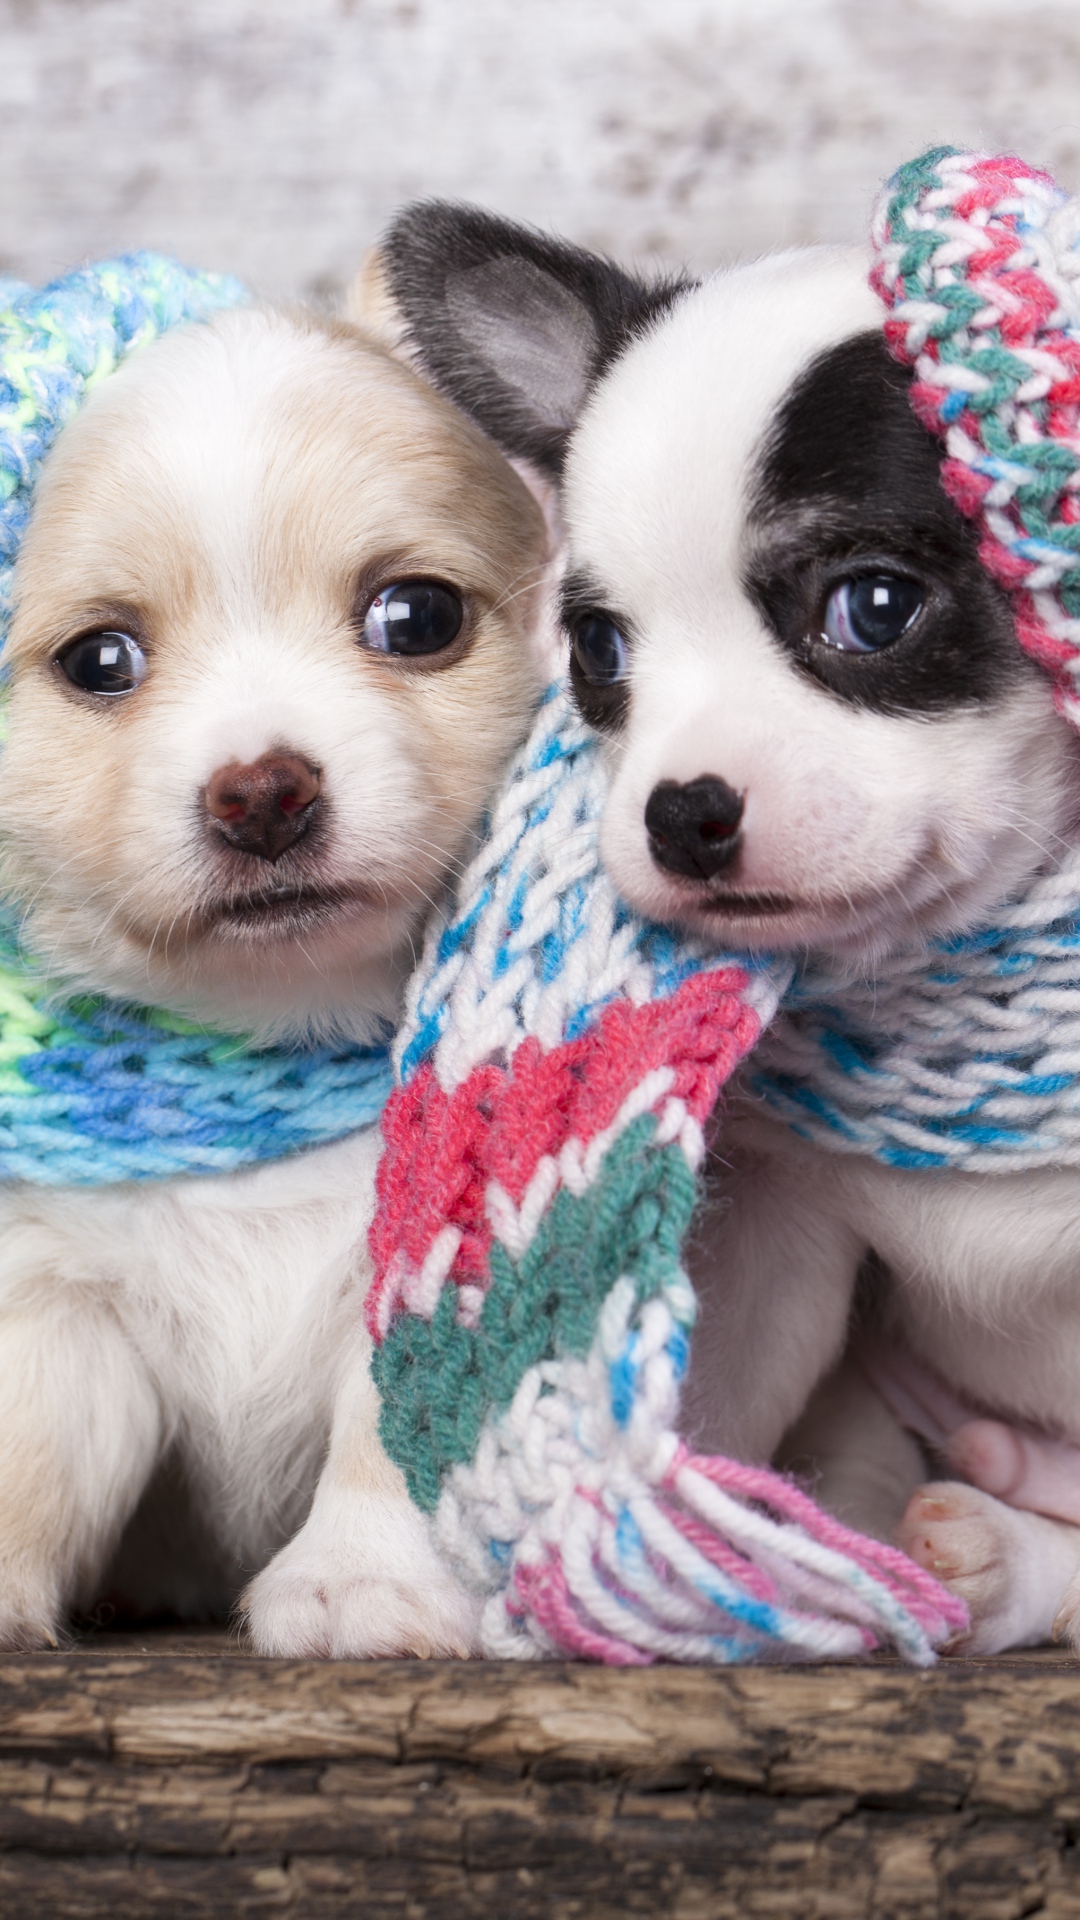 Cute-Scarf-Puppy-Dog-Couple-iPhone-6-wallpaper.